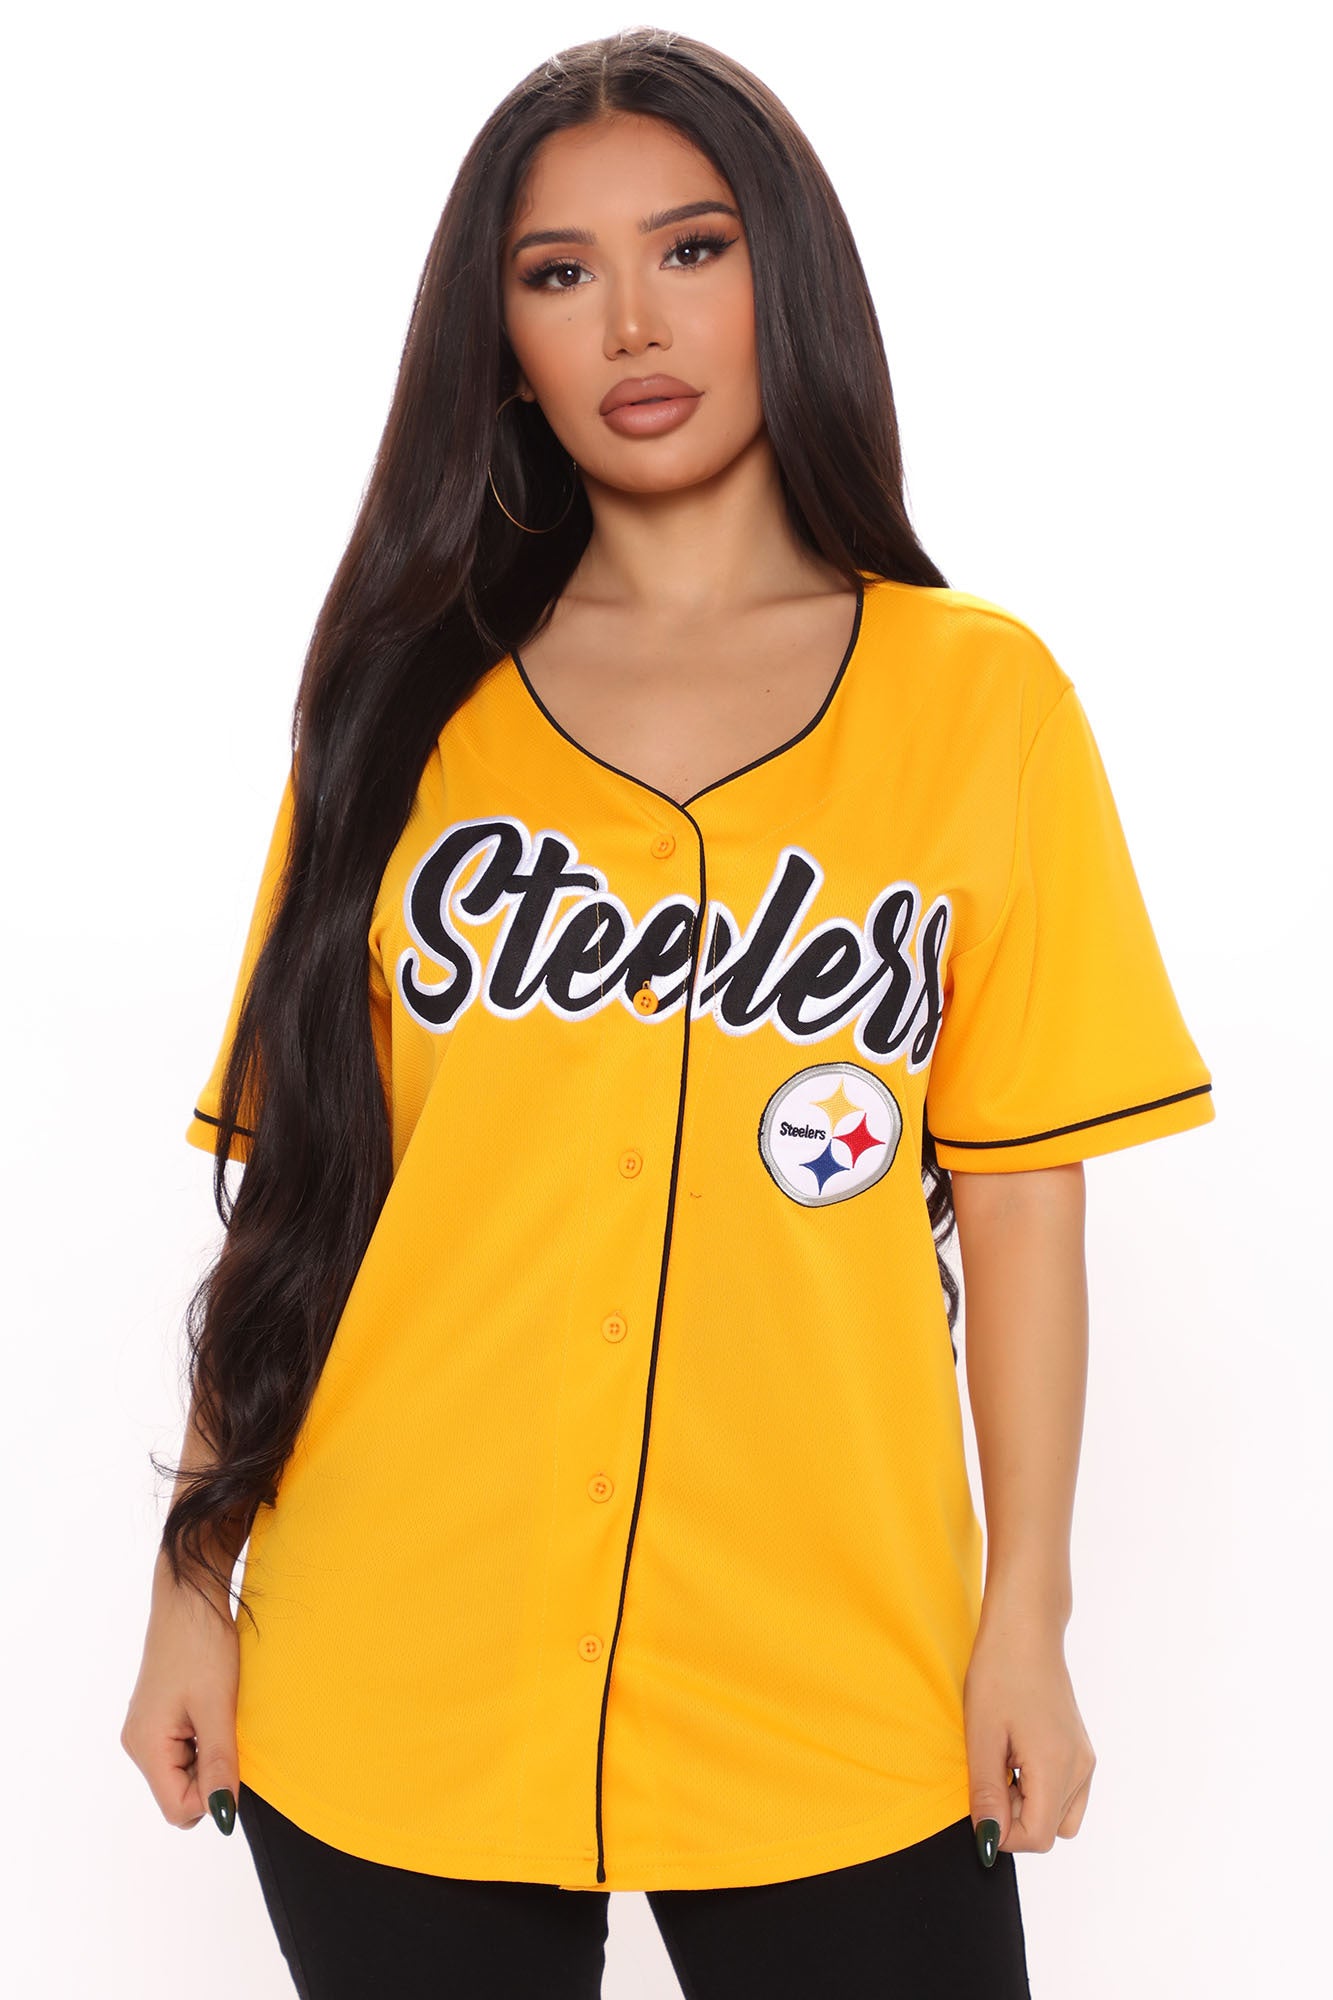 NFL End Zone Steelers Jersey - Yellow/combo